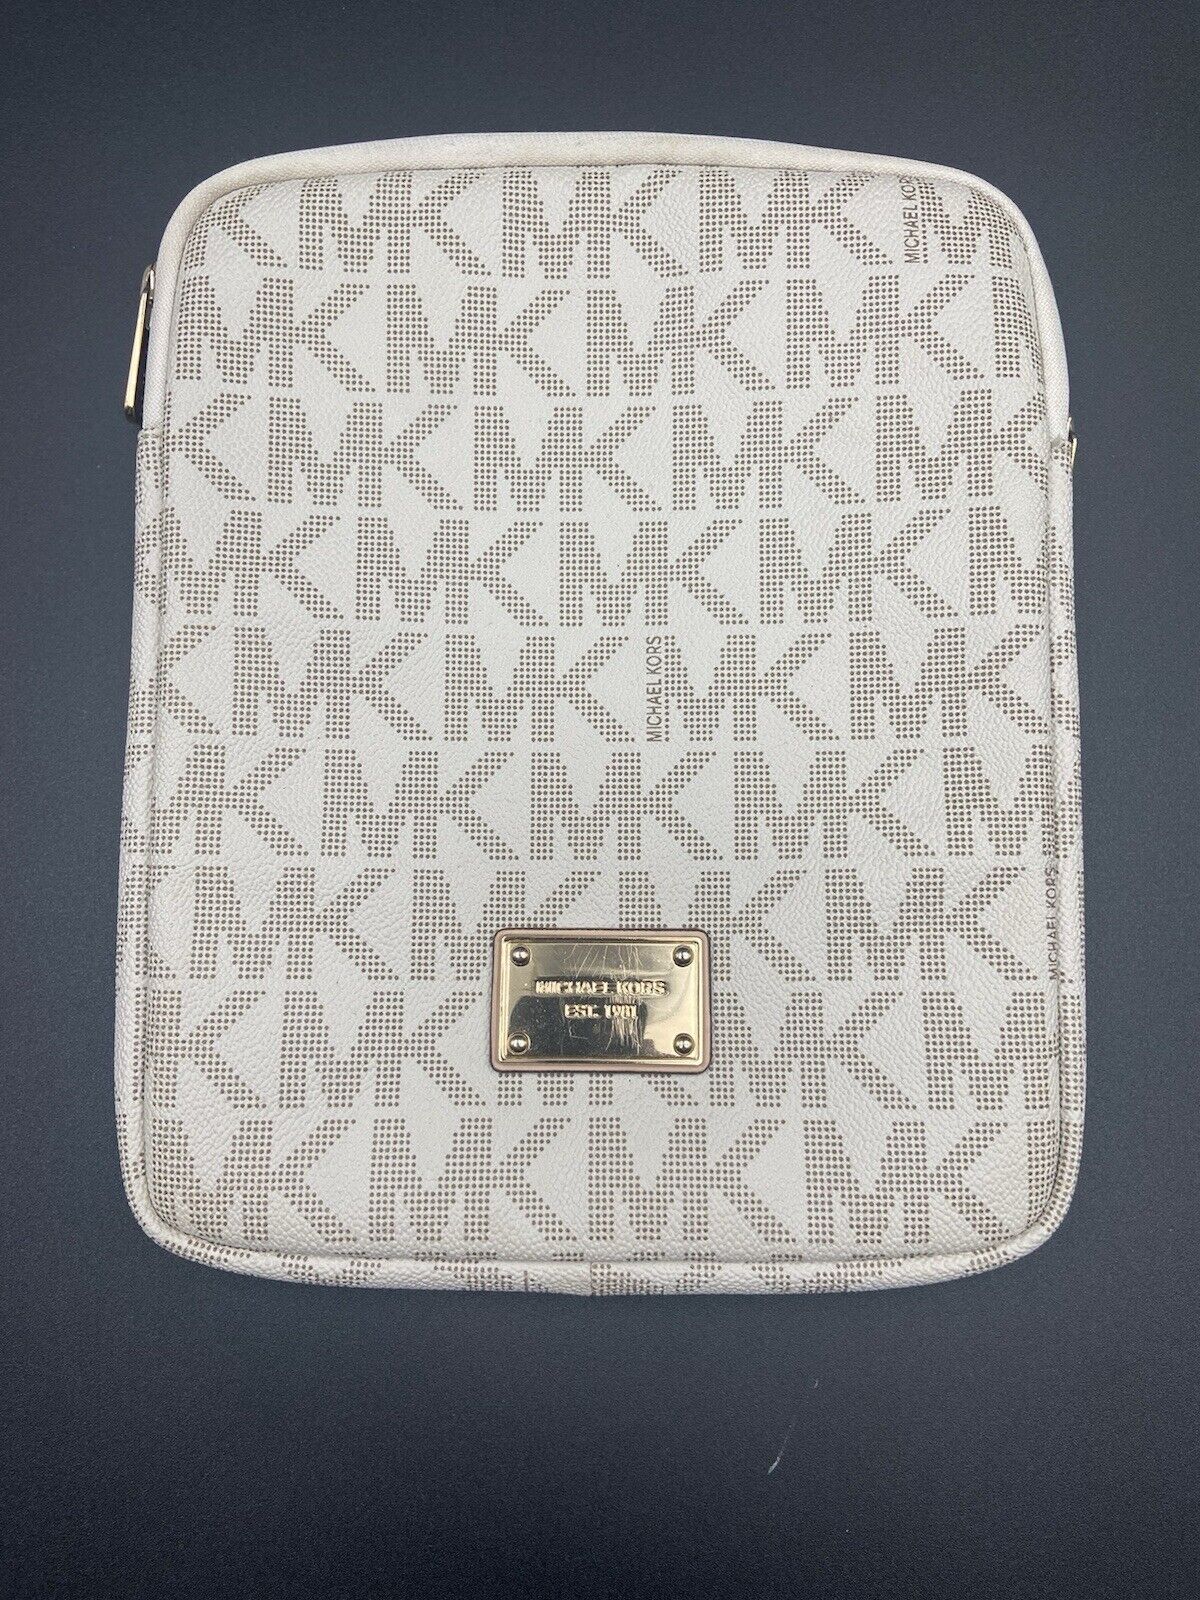 New Michael Kors Off White leather signature iPad,tablet protective case NWOT